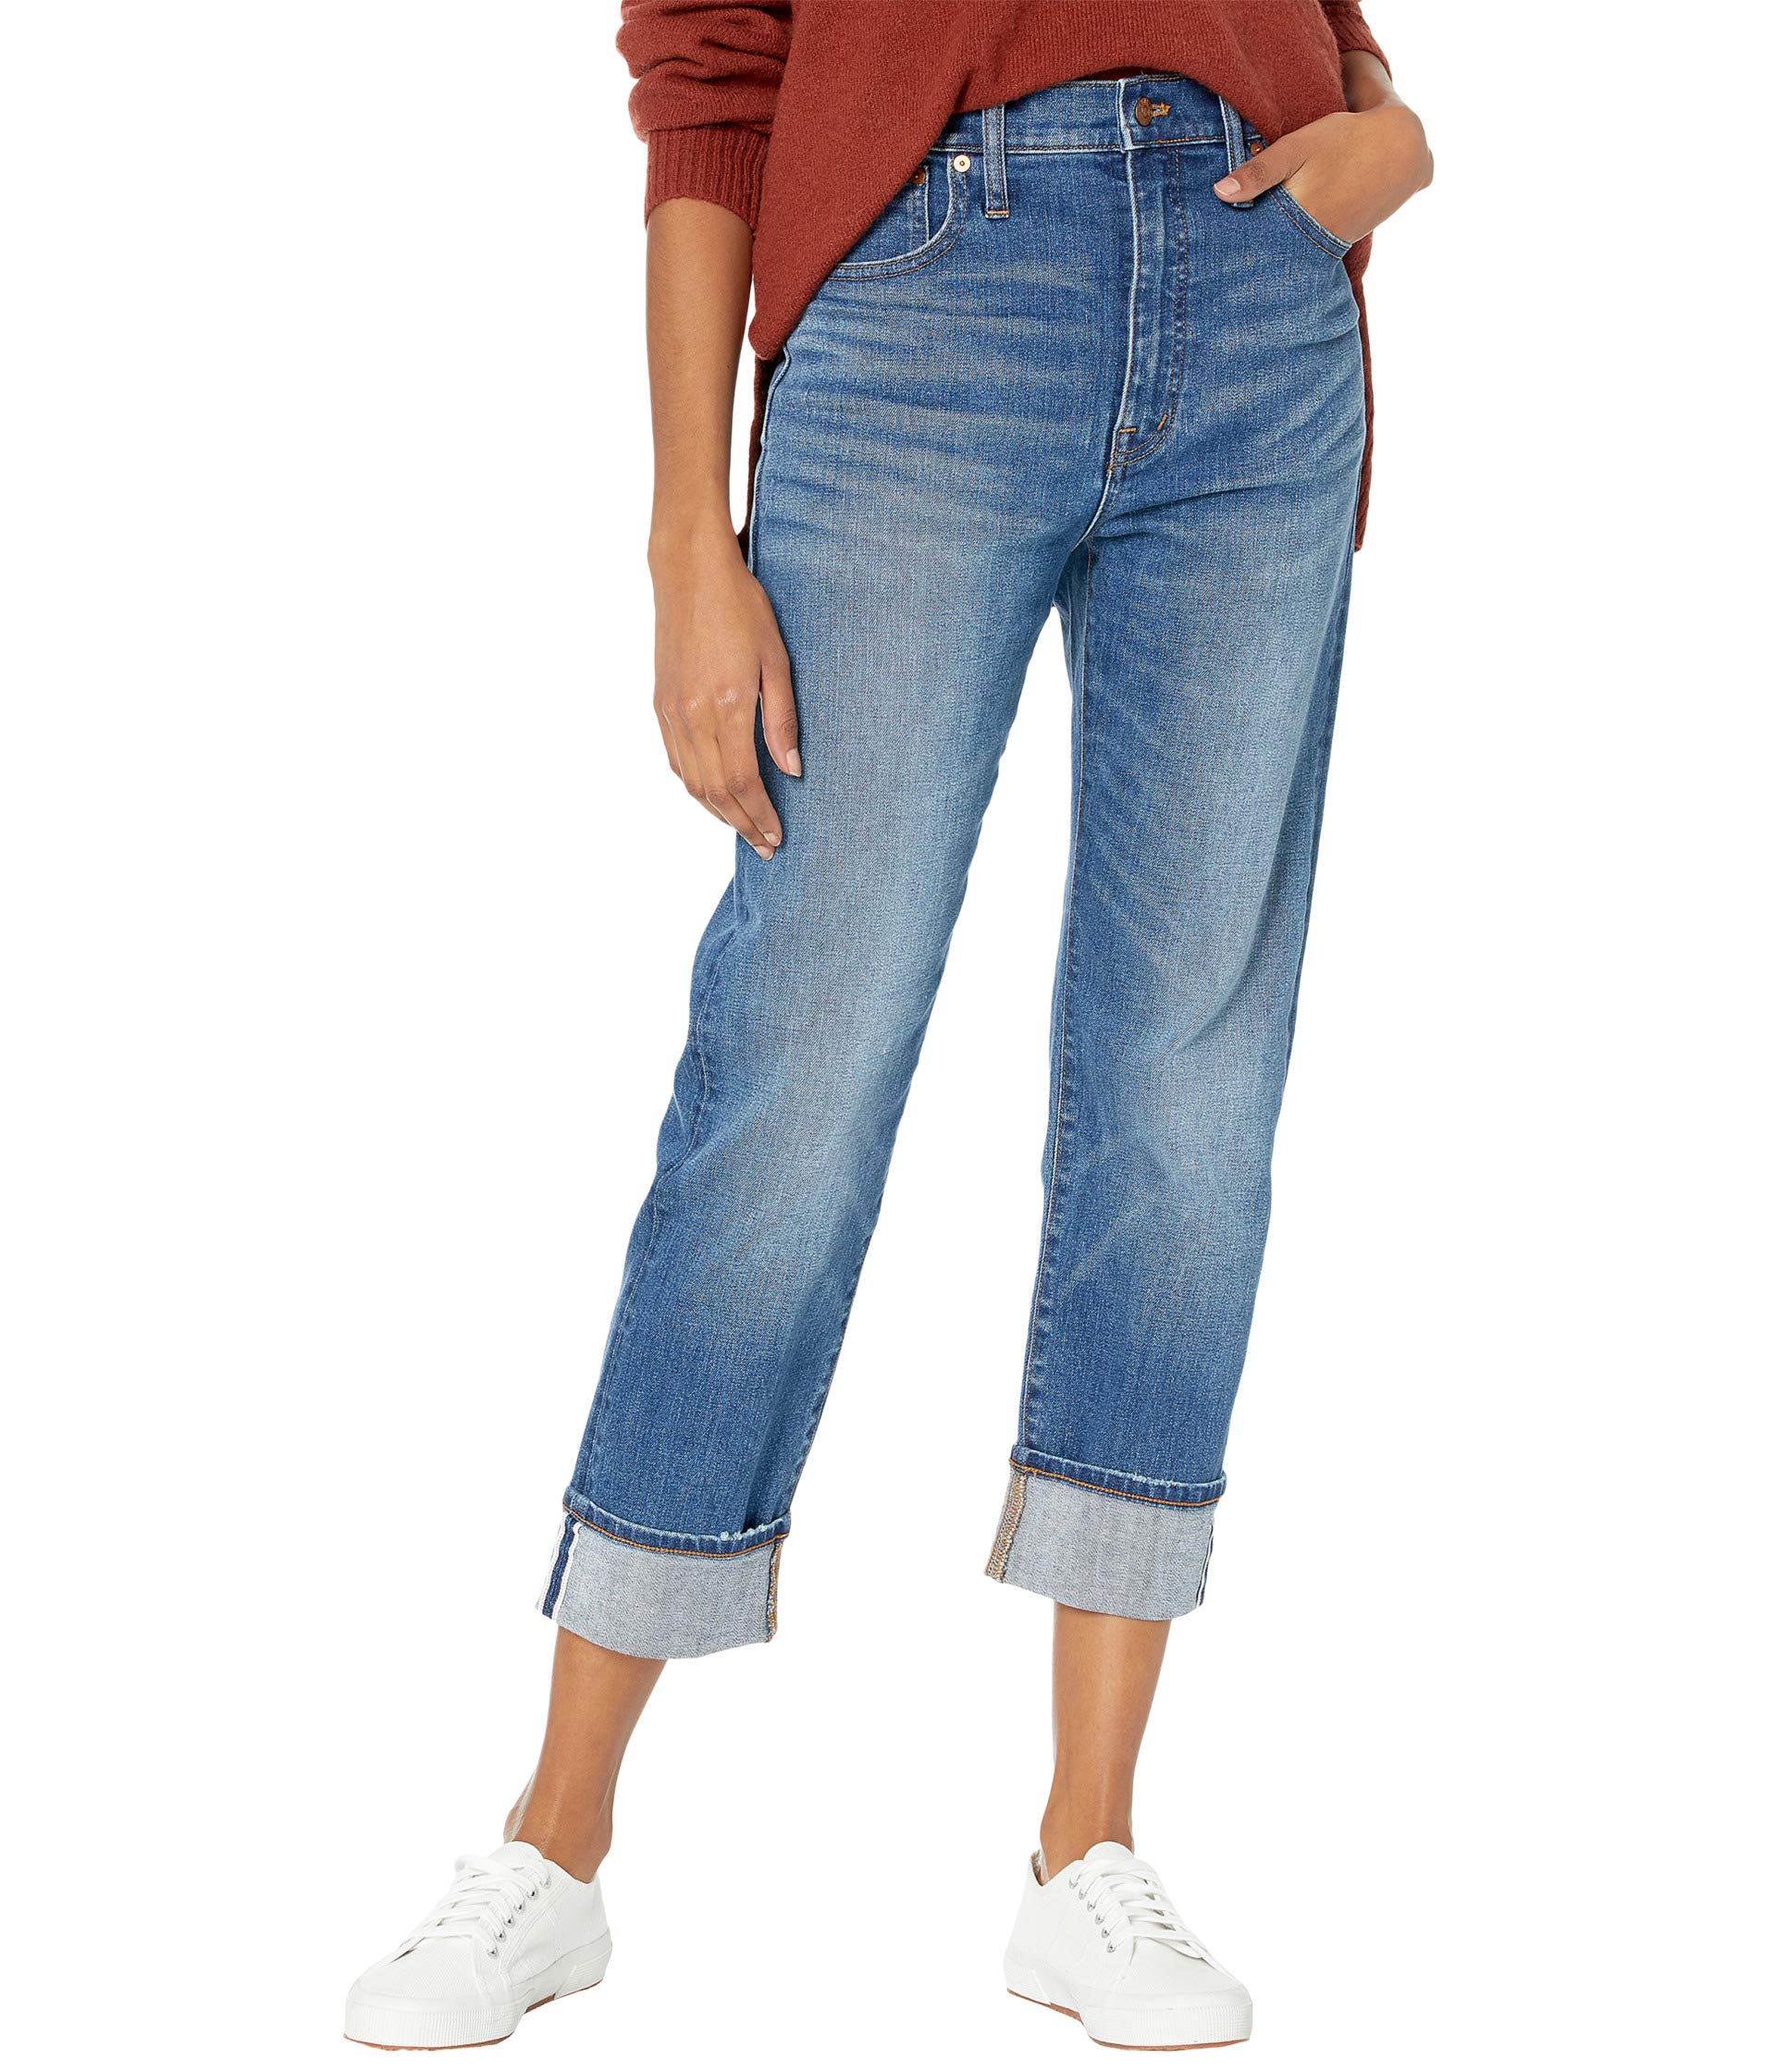 Джинсы Madewell, Classic Straight Jeans in Ives Wash: Selvedge Edition